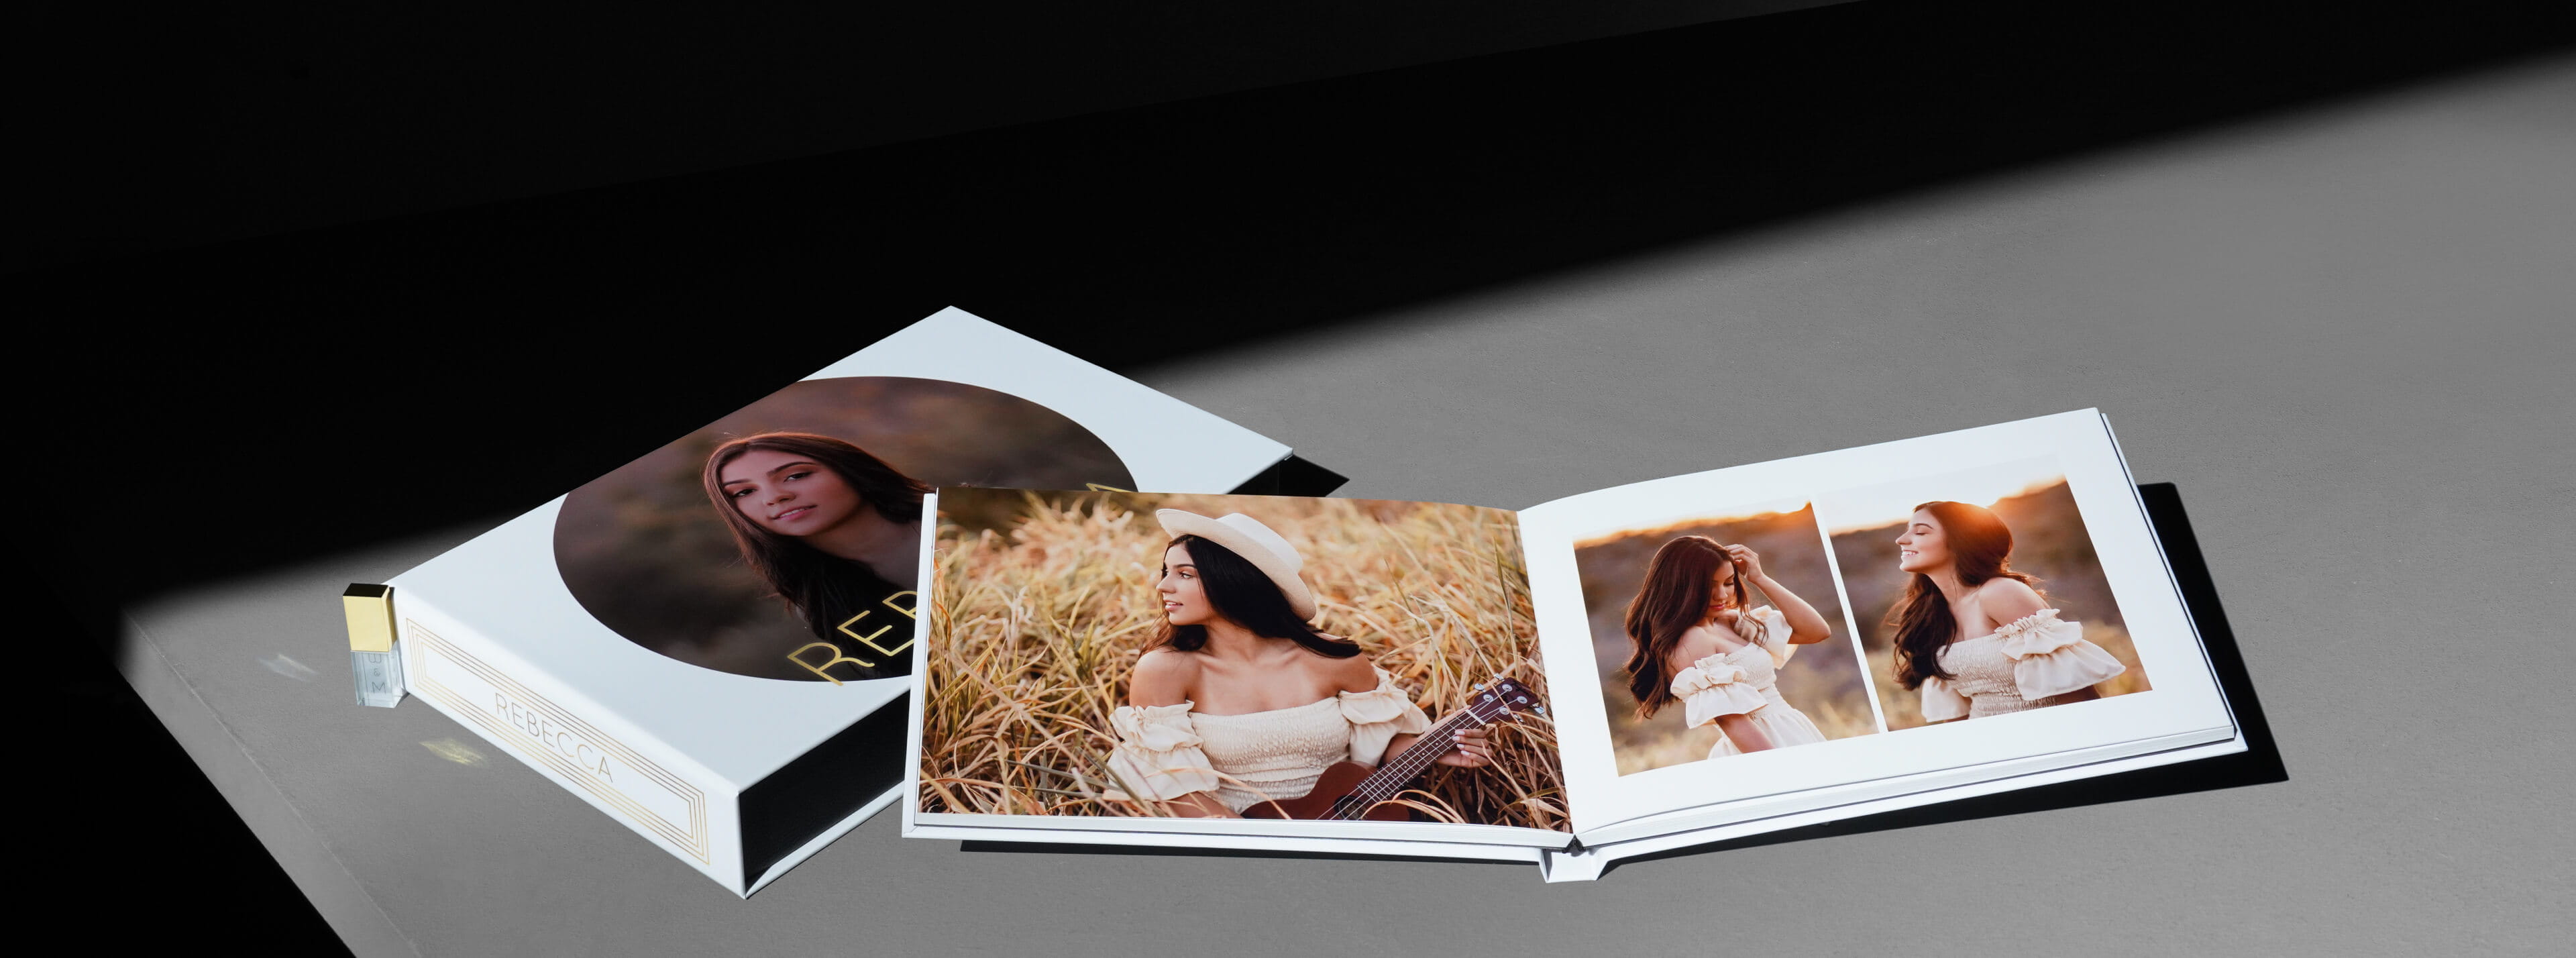 an image box album usb set showing a photo album opened resting on a printed box with usb